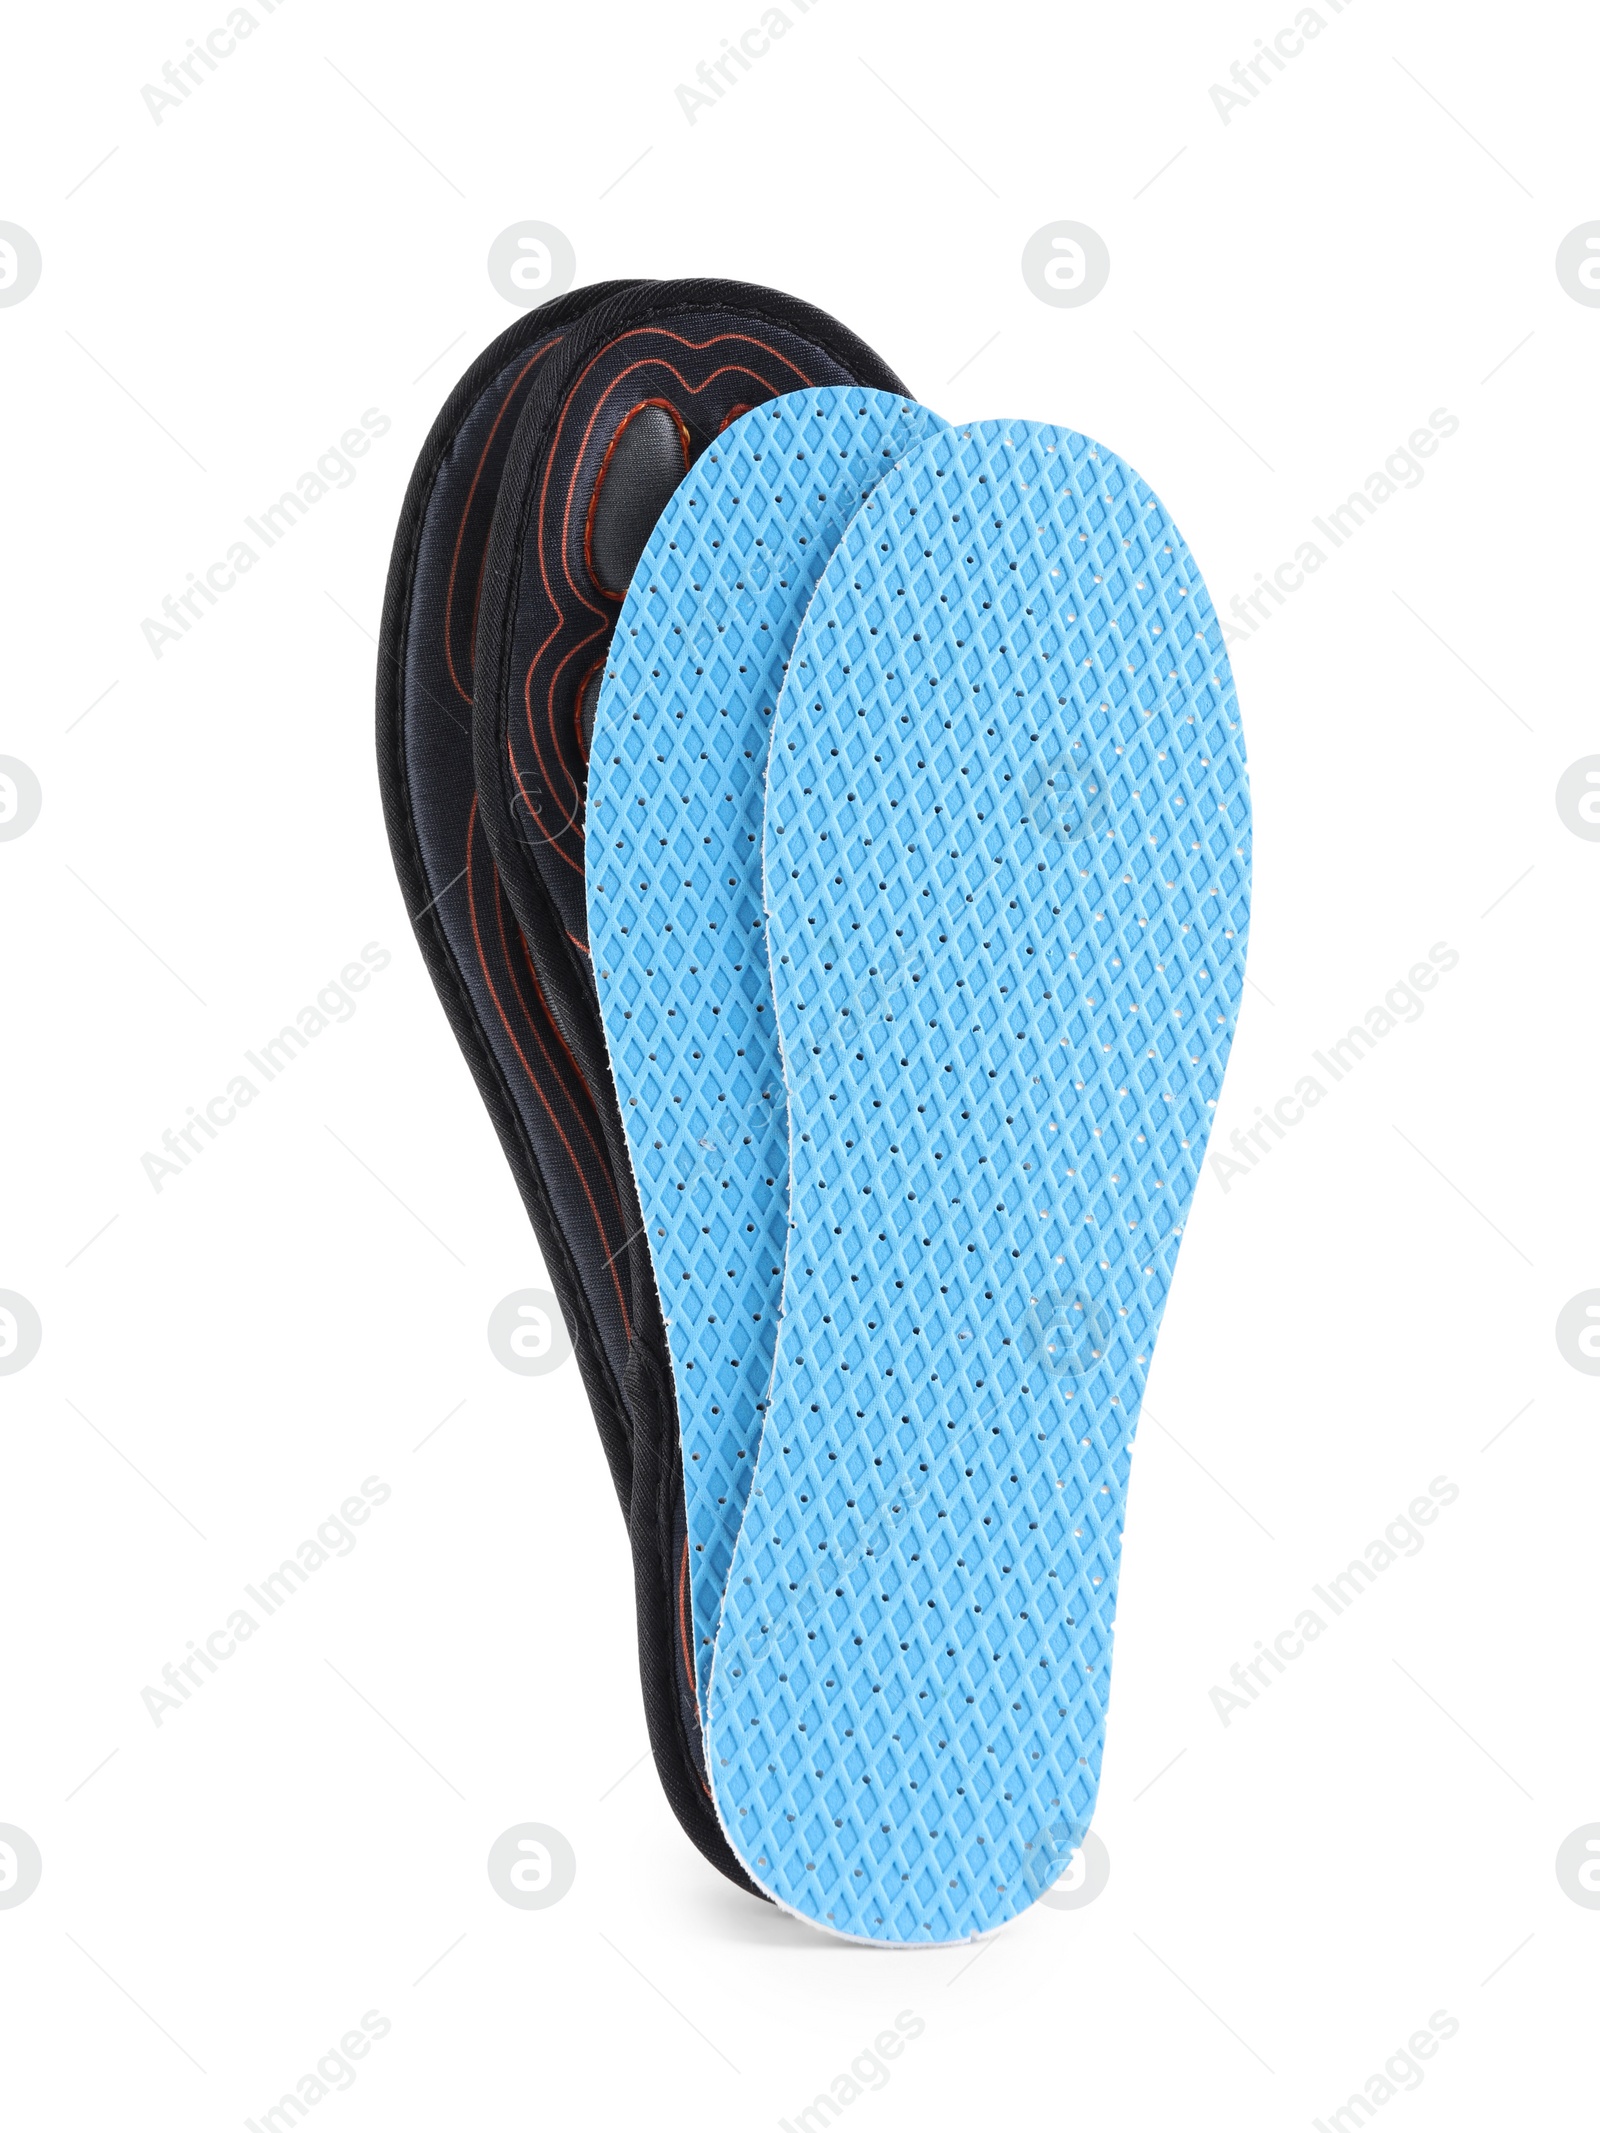 Photo of Shoe insoles on white background, top view